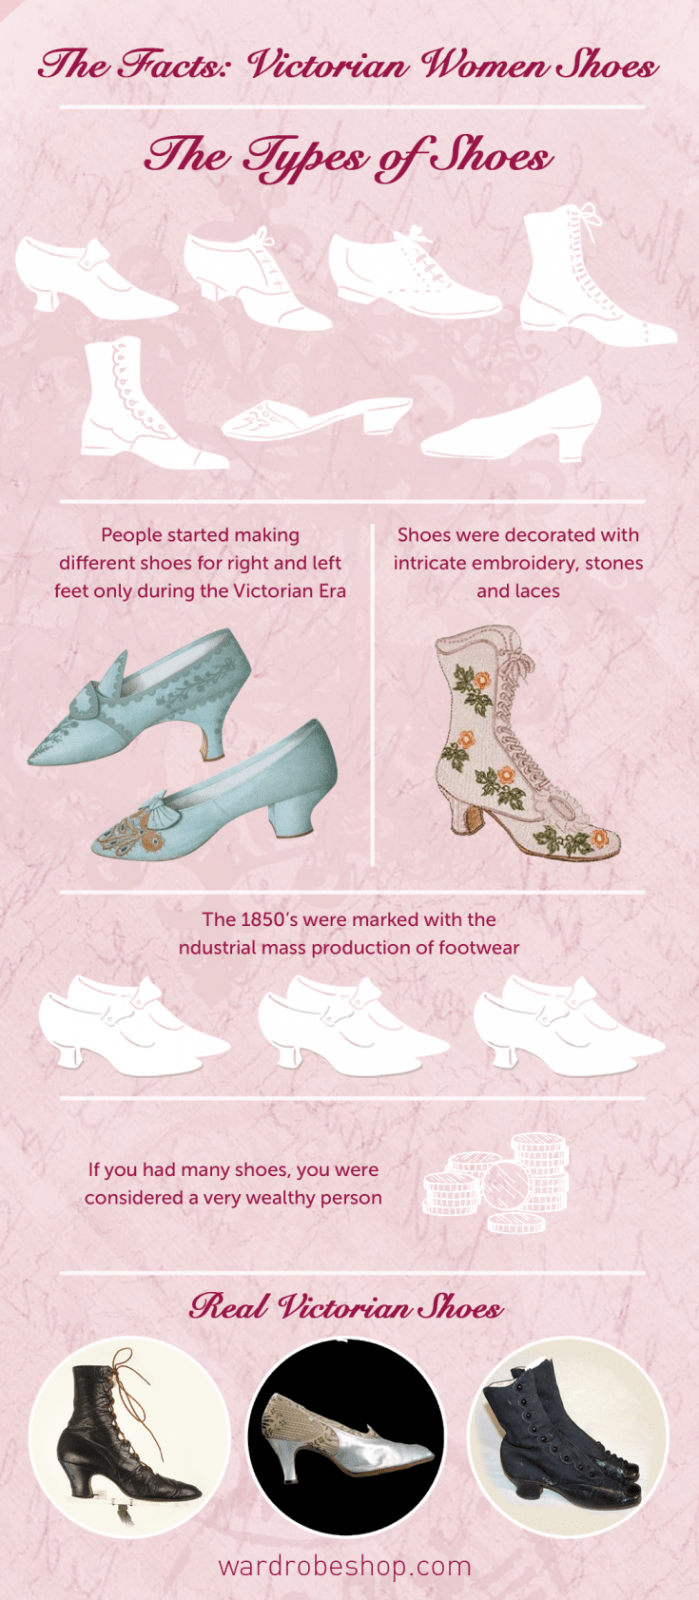 Infographic - The facts and types of Victorian shoes - WardrobeShop